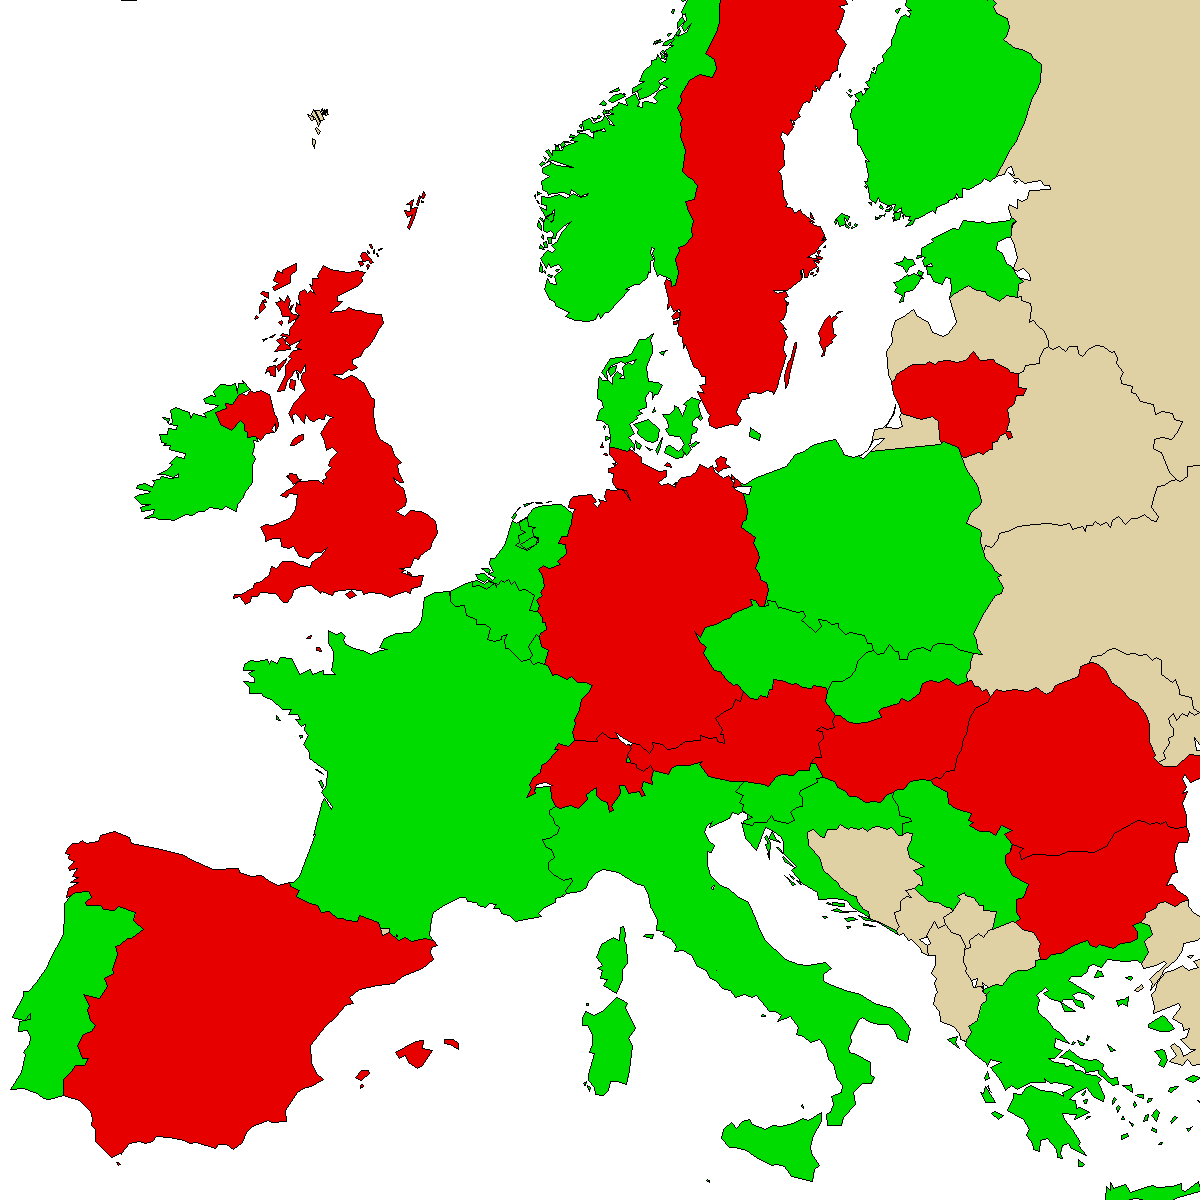 legal info map for our product O-PCE, green are countries where we found no ban, red with ban, grey is unknown